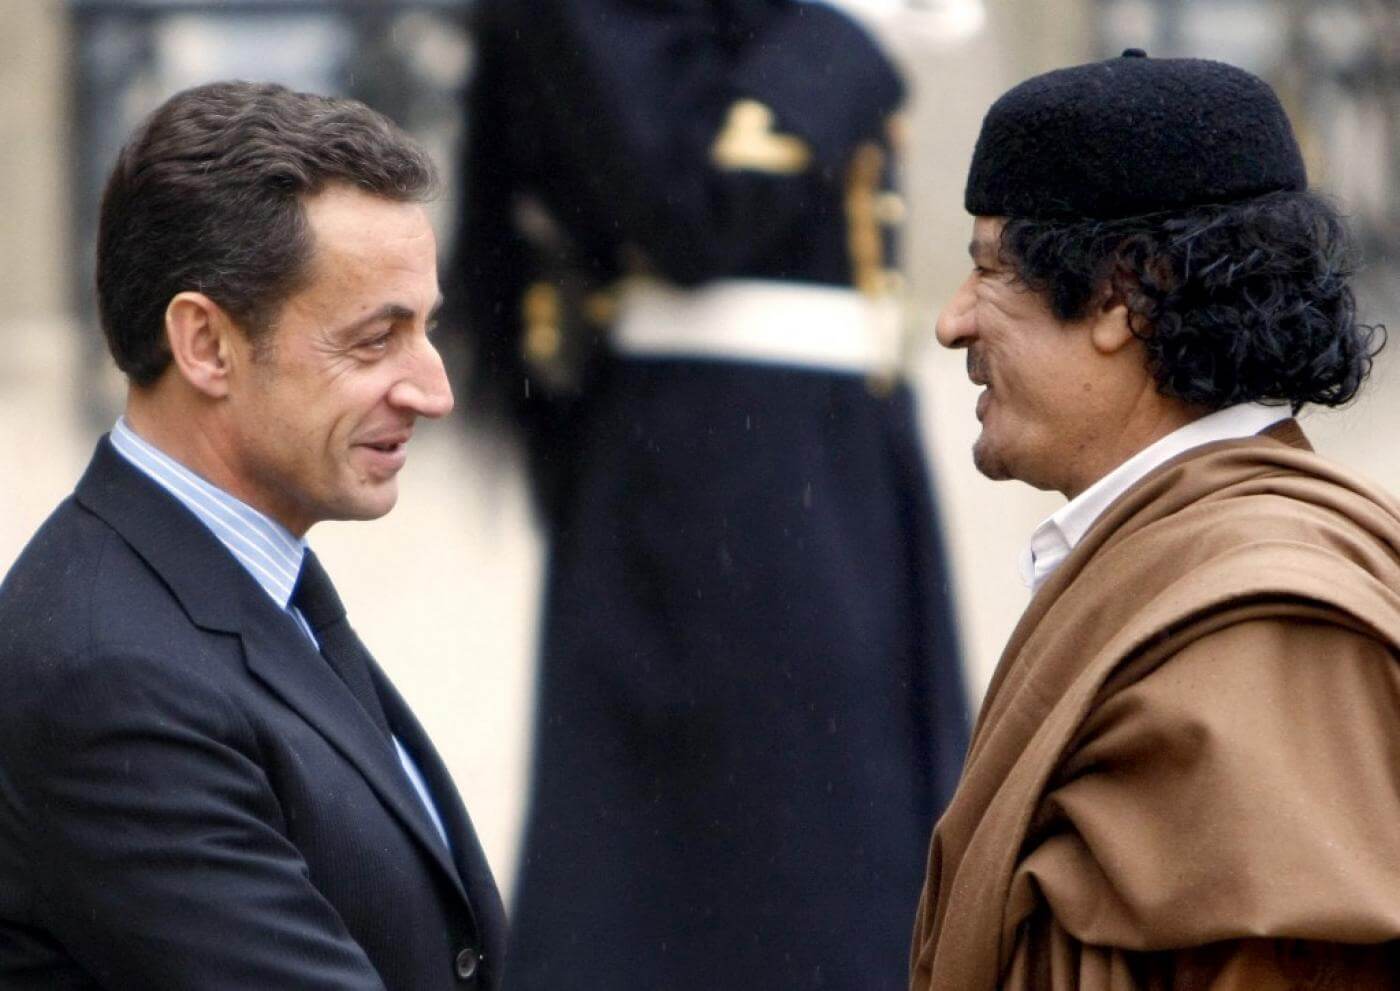 French Executives Prosecuted for Complicity in Suppressing Opposition in Egypt and Libya